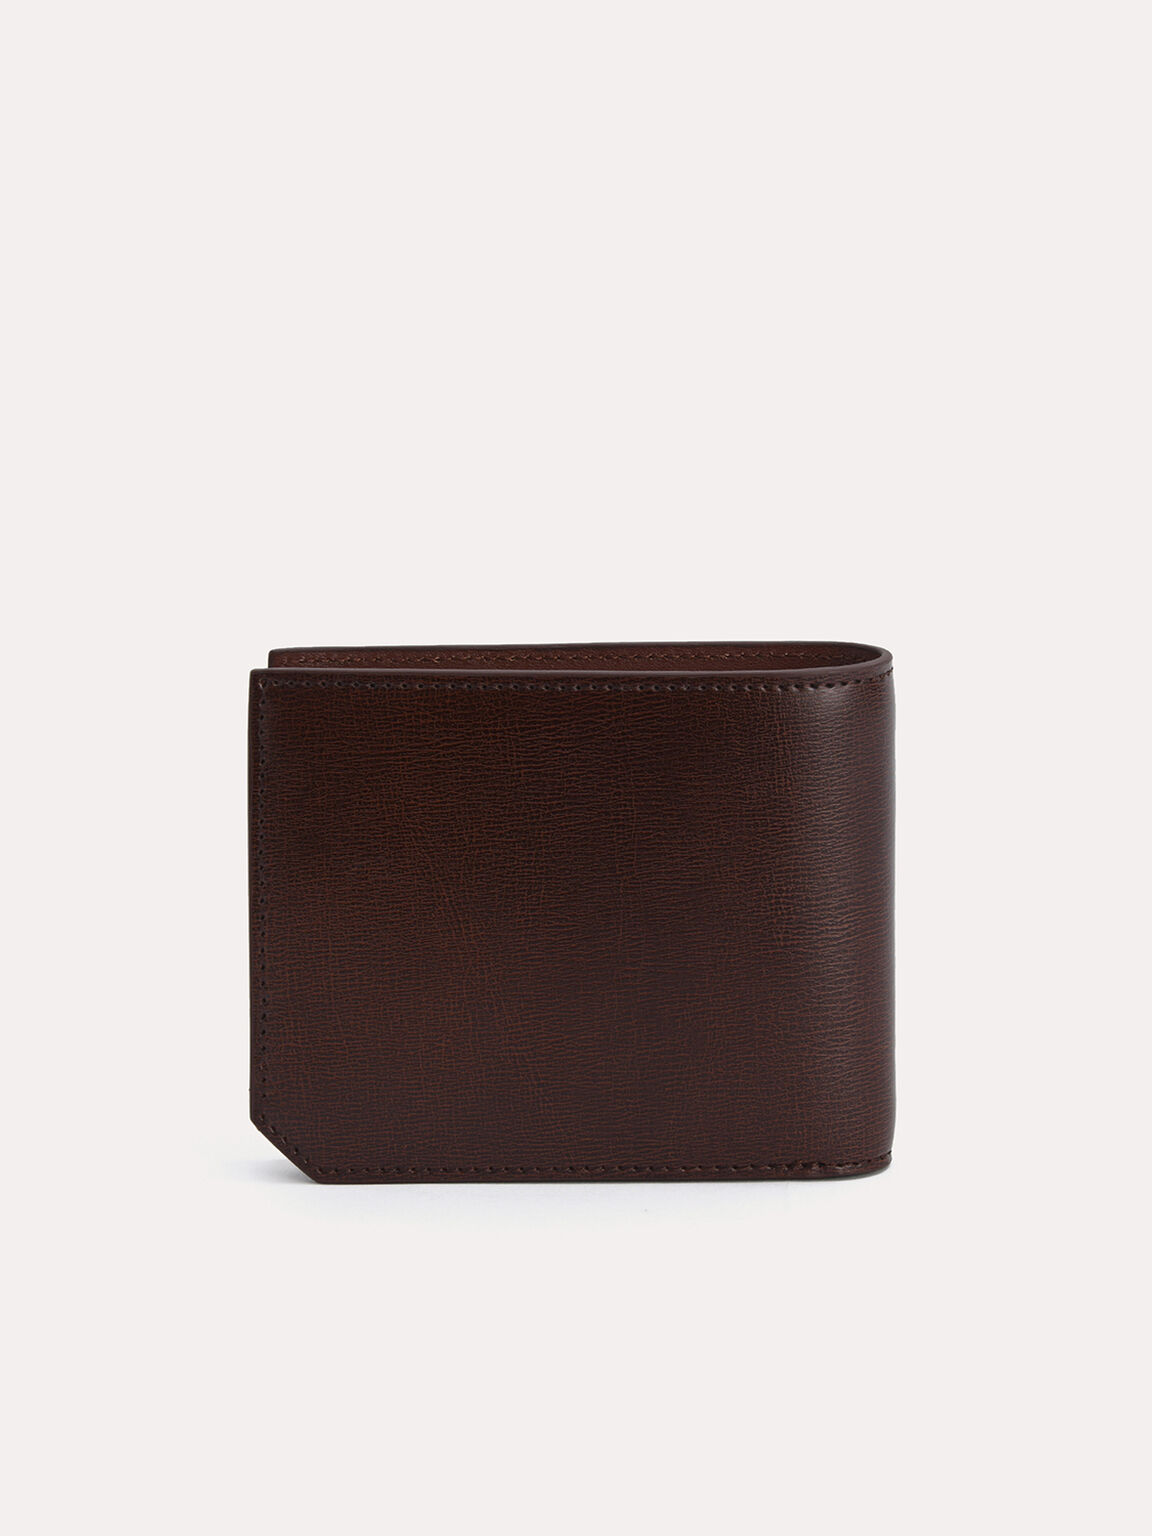 Textured Leather Bi-Fold Wallet with Flip, Brown